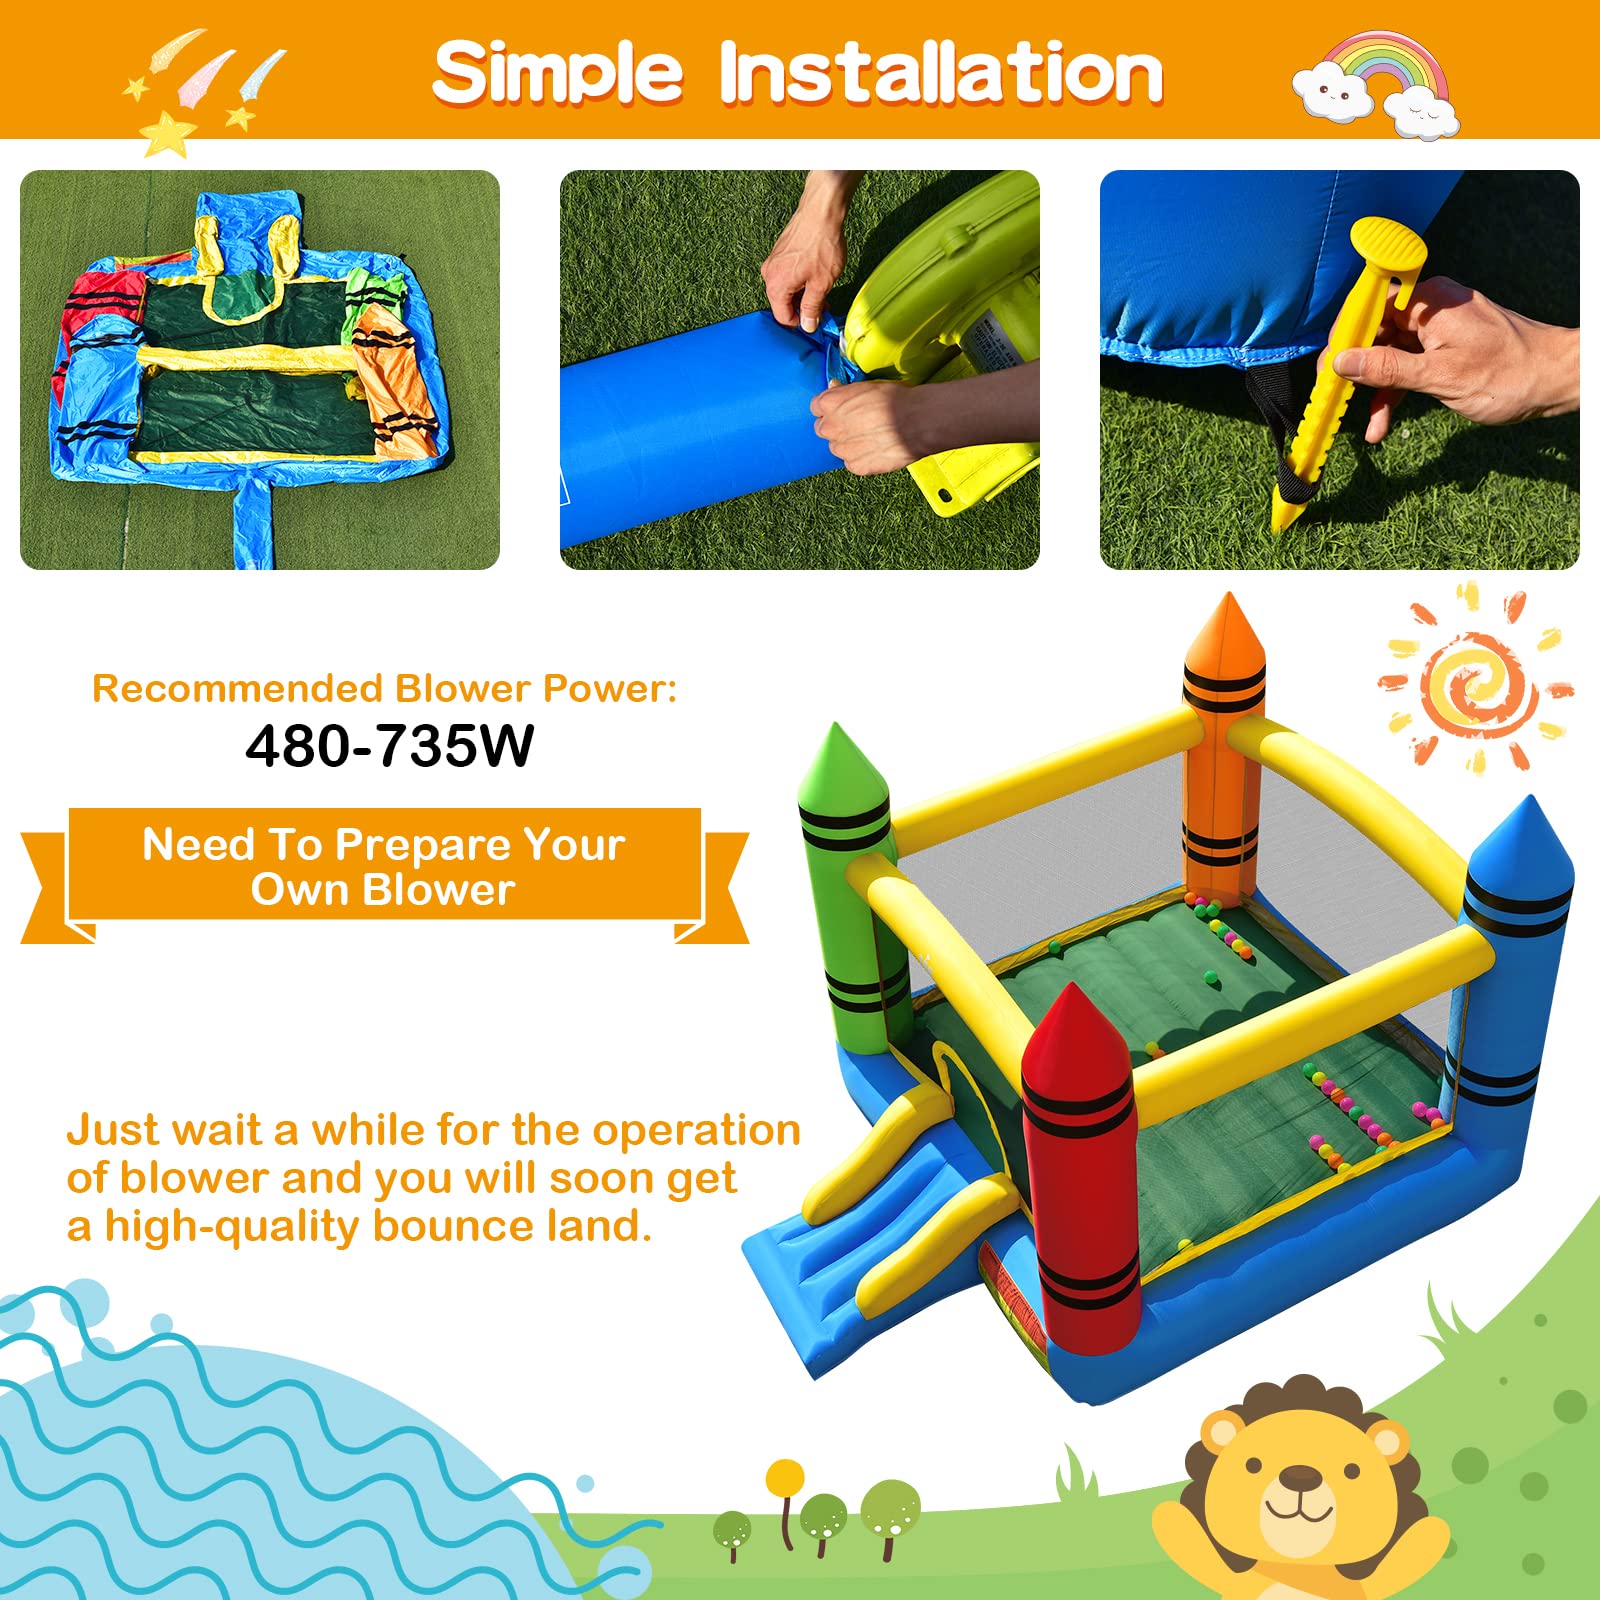 Inflatable Bounce House with Large Jumping Area